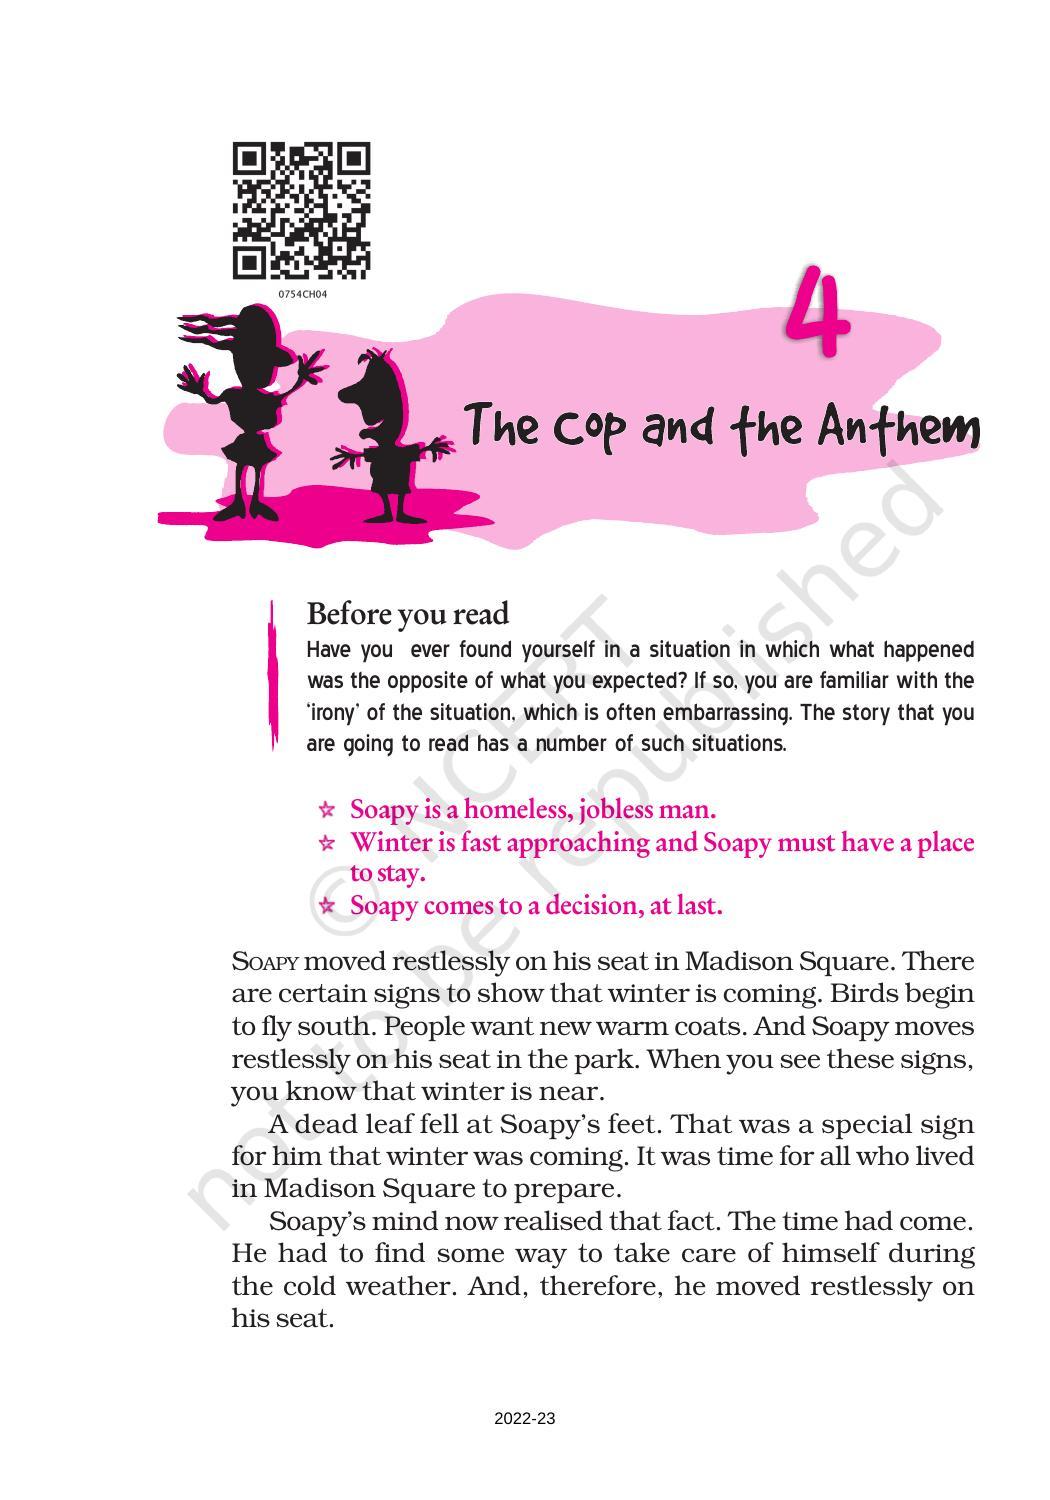 NCERT Book for Class 7 English (An Alien Hand): Chapter 4-The Cop and the Anthem - Page 1